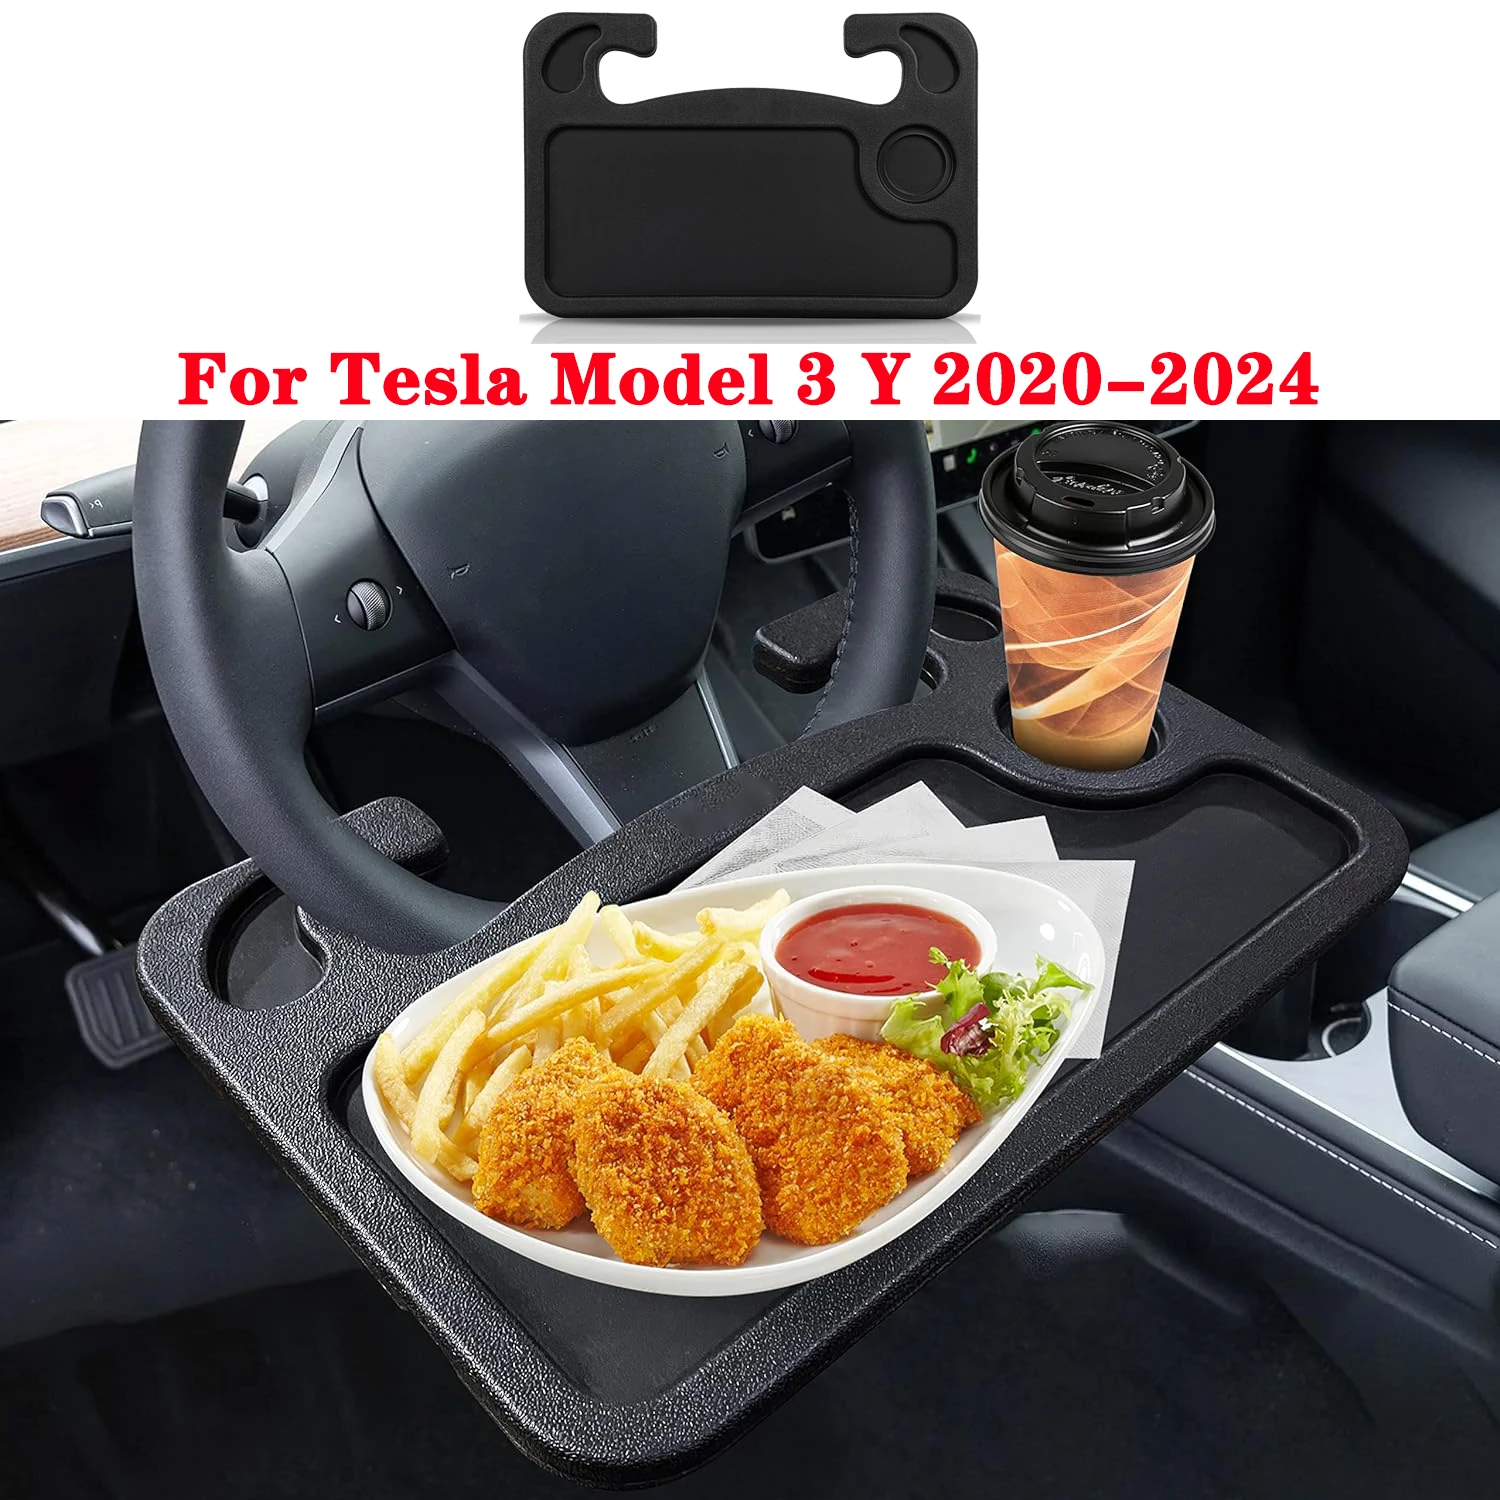 

Car Steering Wheel Desk For Tesla Model 3 Y 2020-2024, Seat Stand Trays Steering Wheel Under Table for Eating, Work and Travel